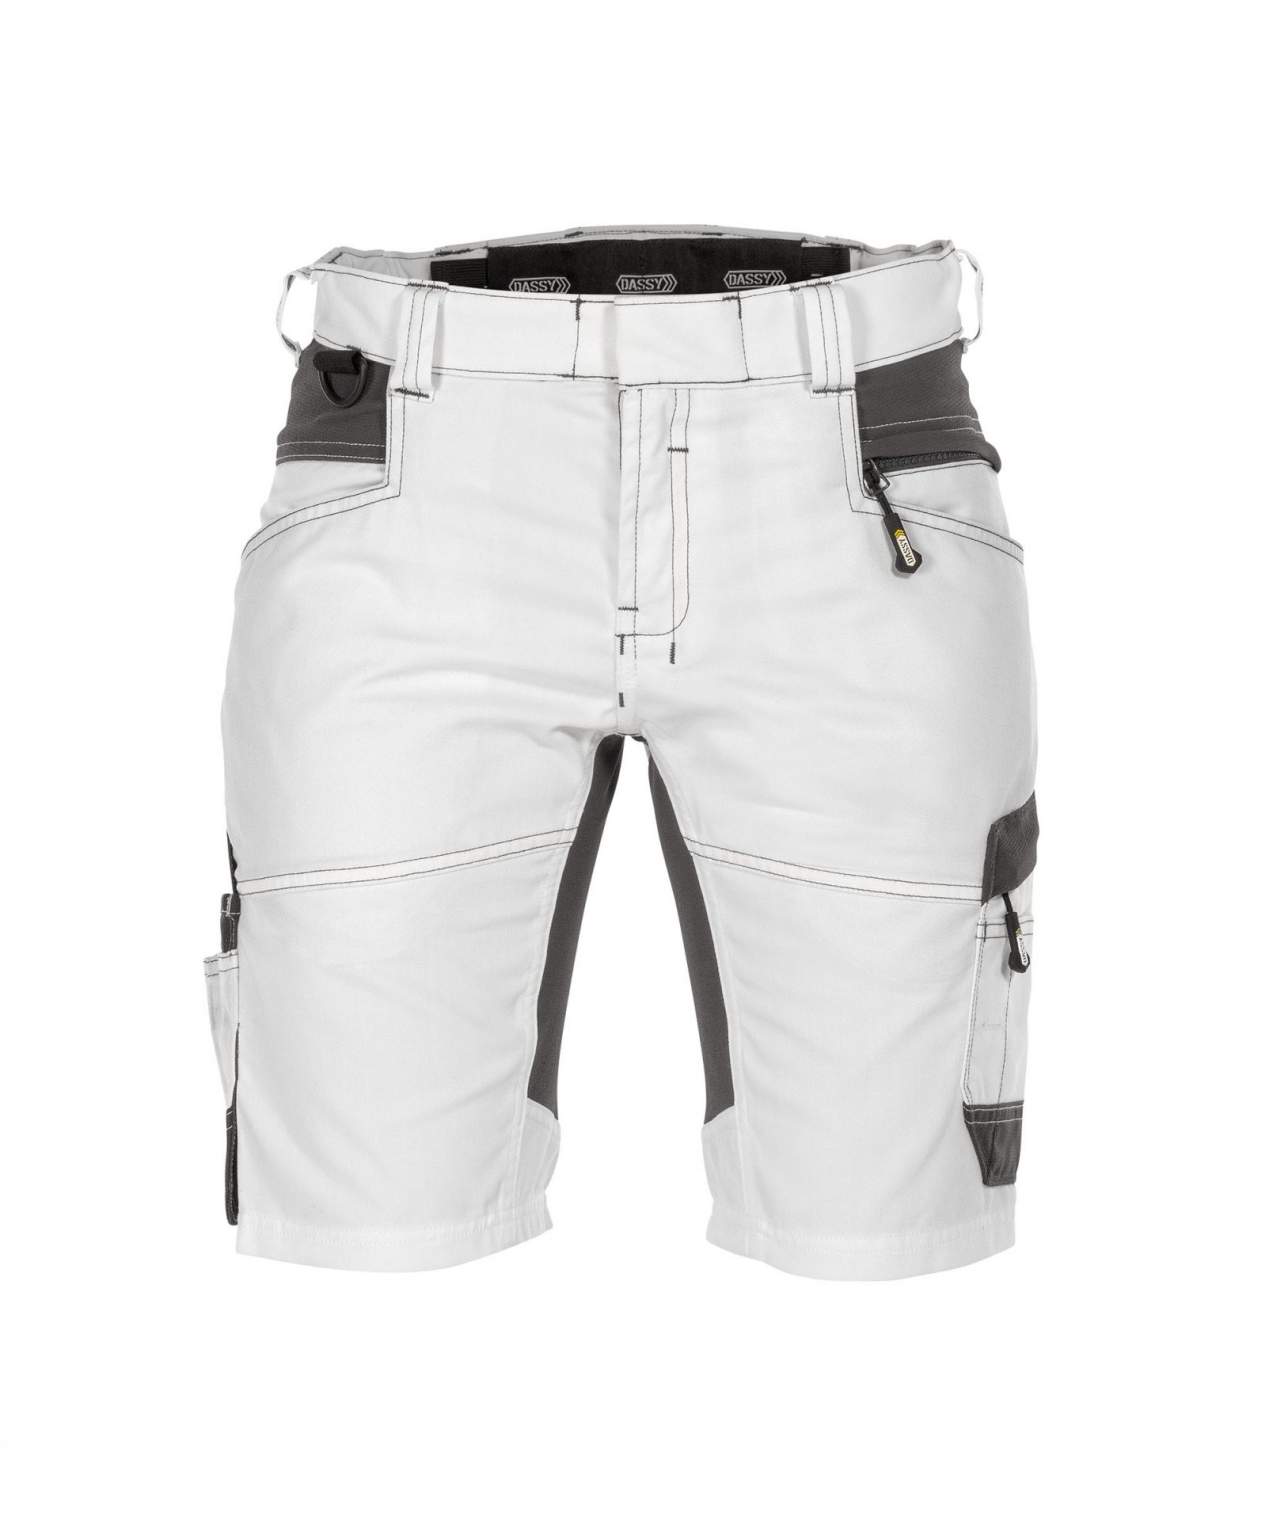 DASSY® Axis Painters Malershorts mit Stretch 